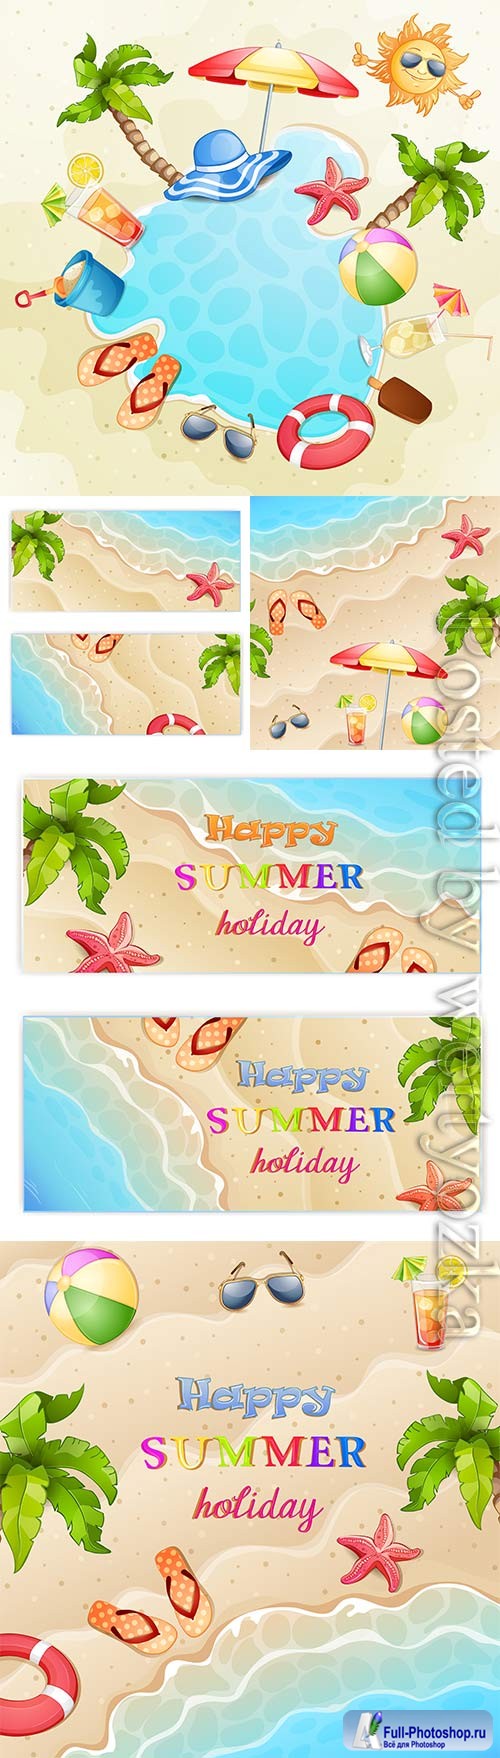 Summer vacation, sea, palm trees, cocktails in vector vol 4